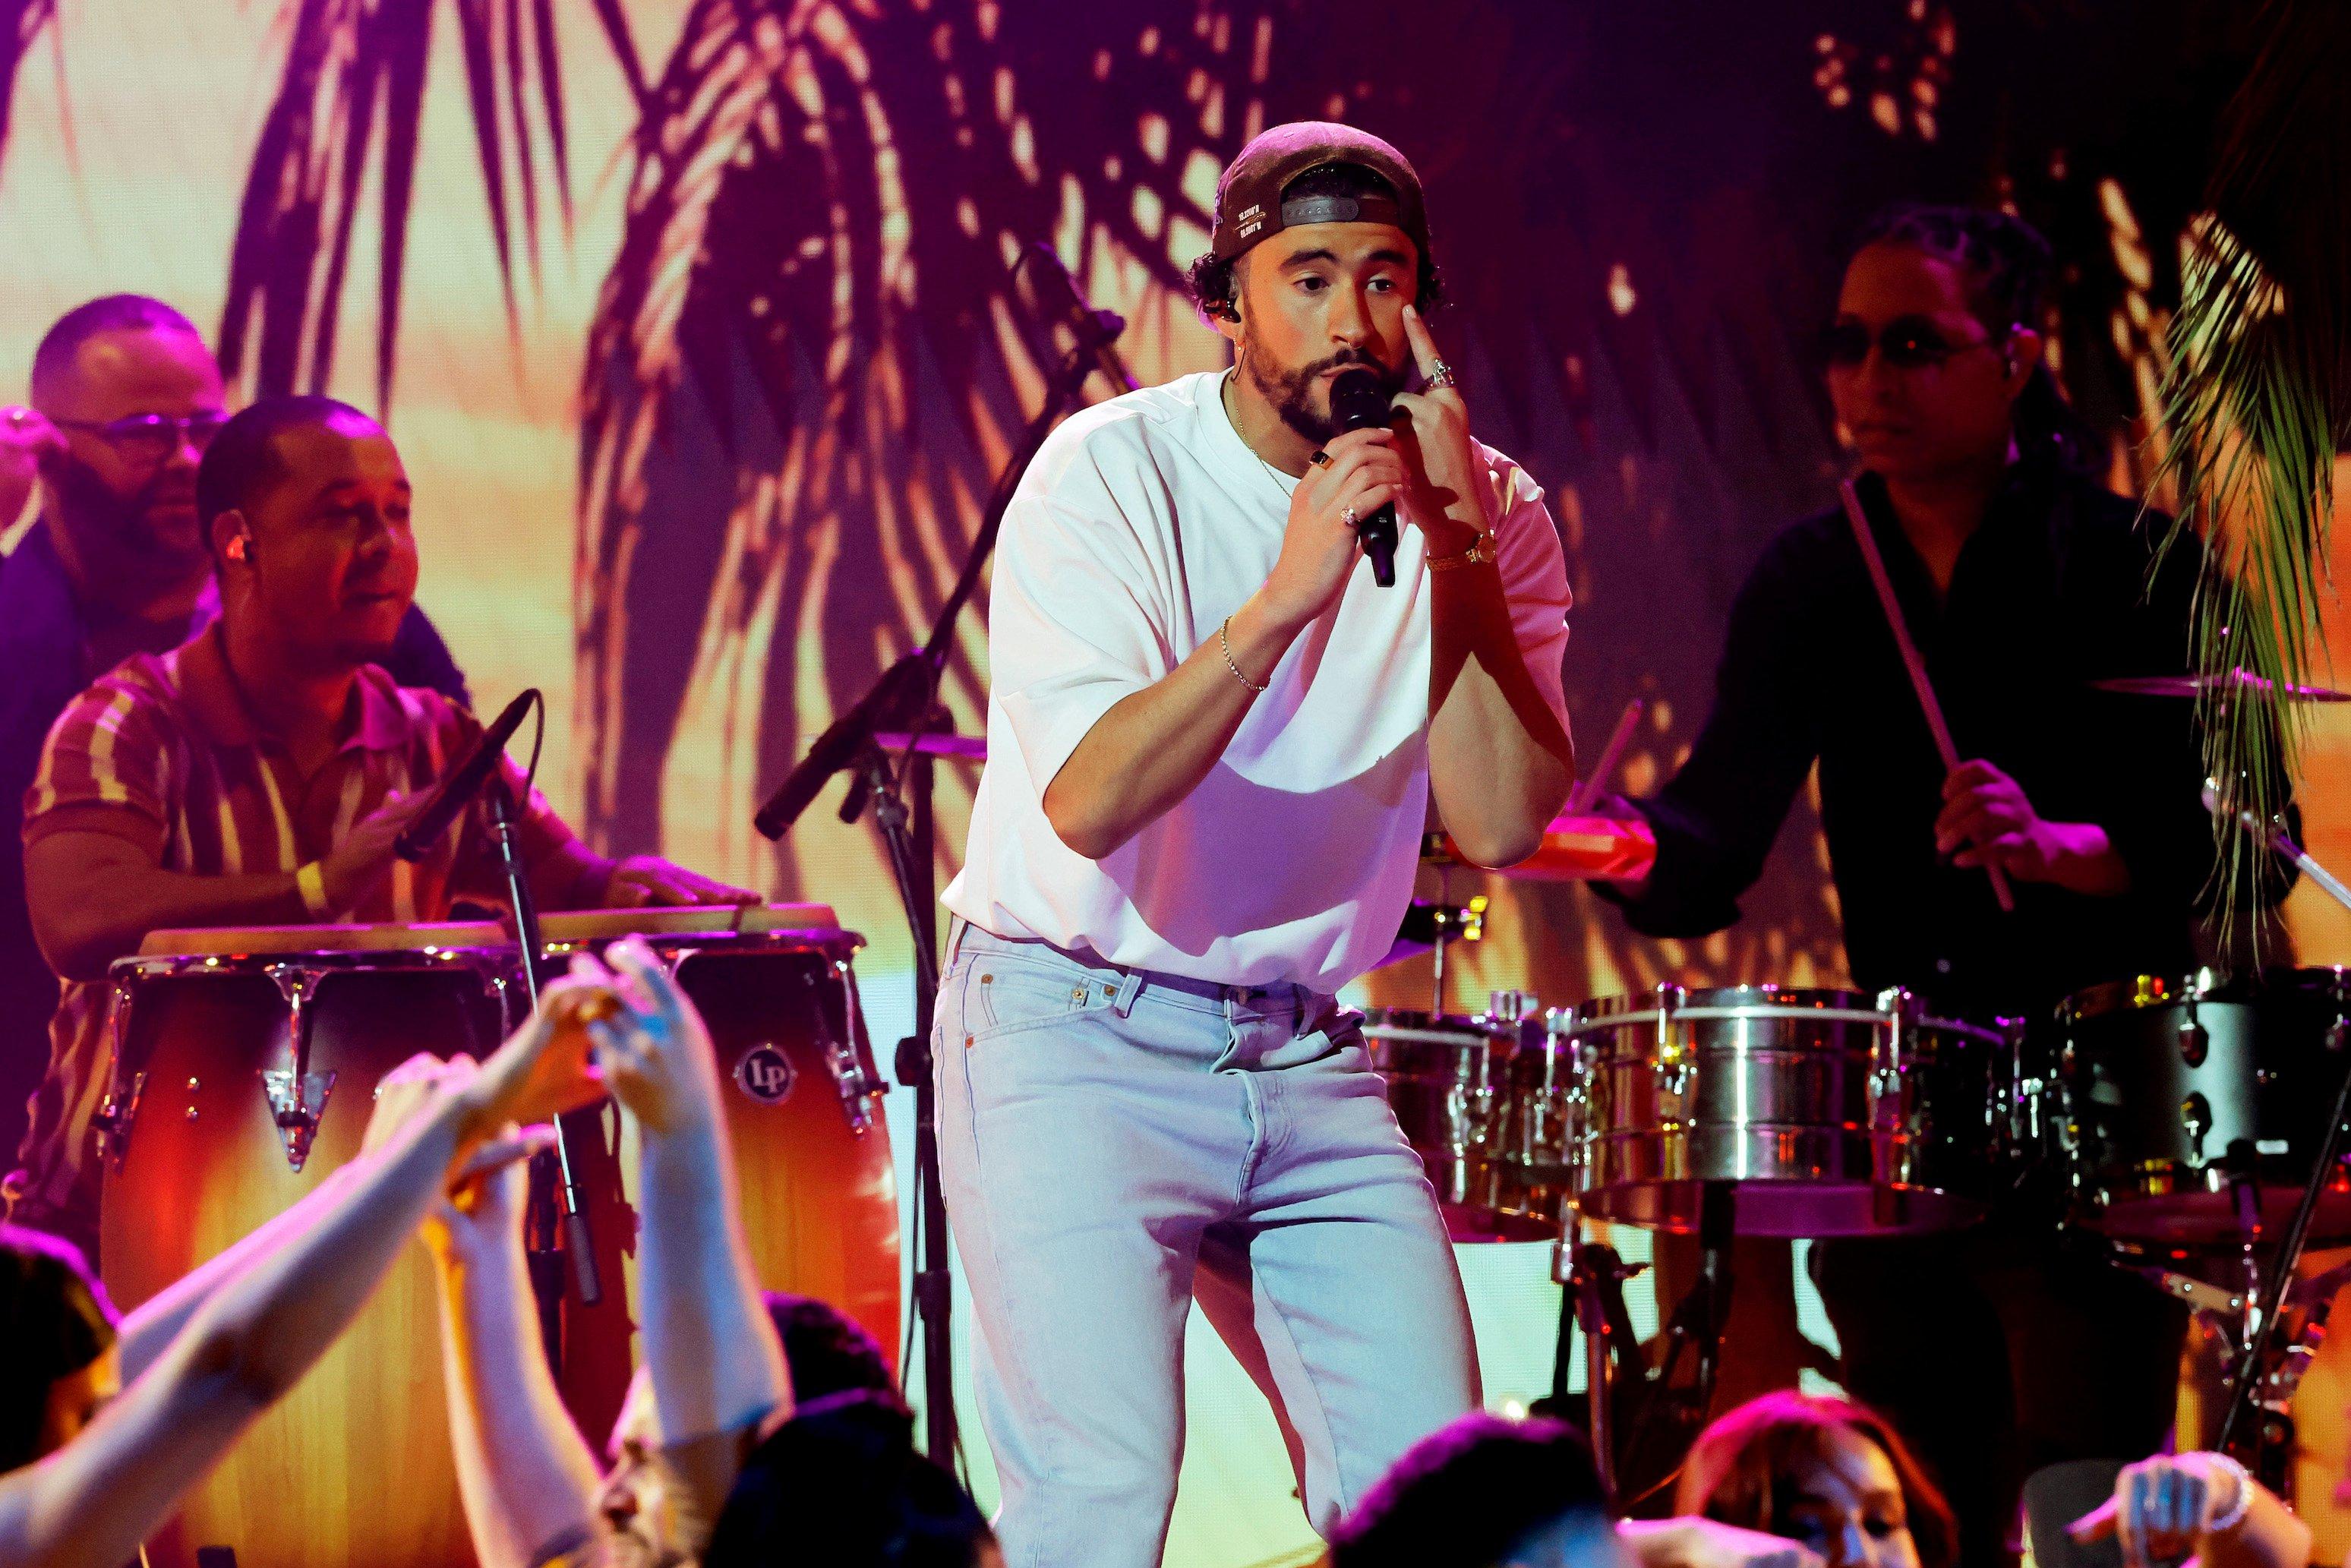 Image of Bad Bunny performing at the 23rd Annual Latin Grammys in Las Vegas. He is a light-skinned Puerto Rican man with a beard wearing a backwards, black baseball cap over his curly, black hair, a white t-shirt, and light blue jeans. He's singing into a microphone while pointing at his eye with the other hand. There are drummers behind him playing conga and snare drums, and there is a palm tree motif in the background under pink and orange light. 